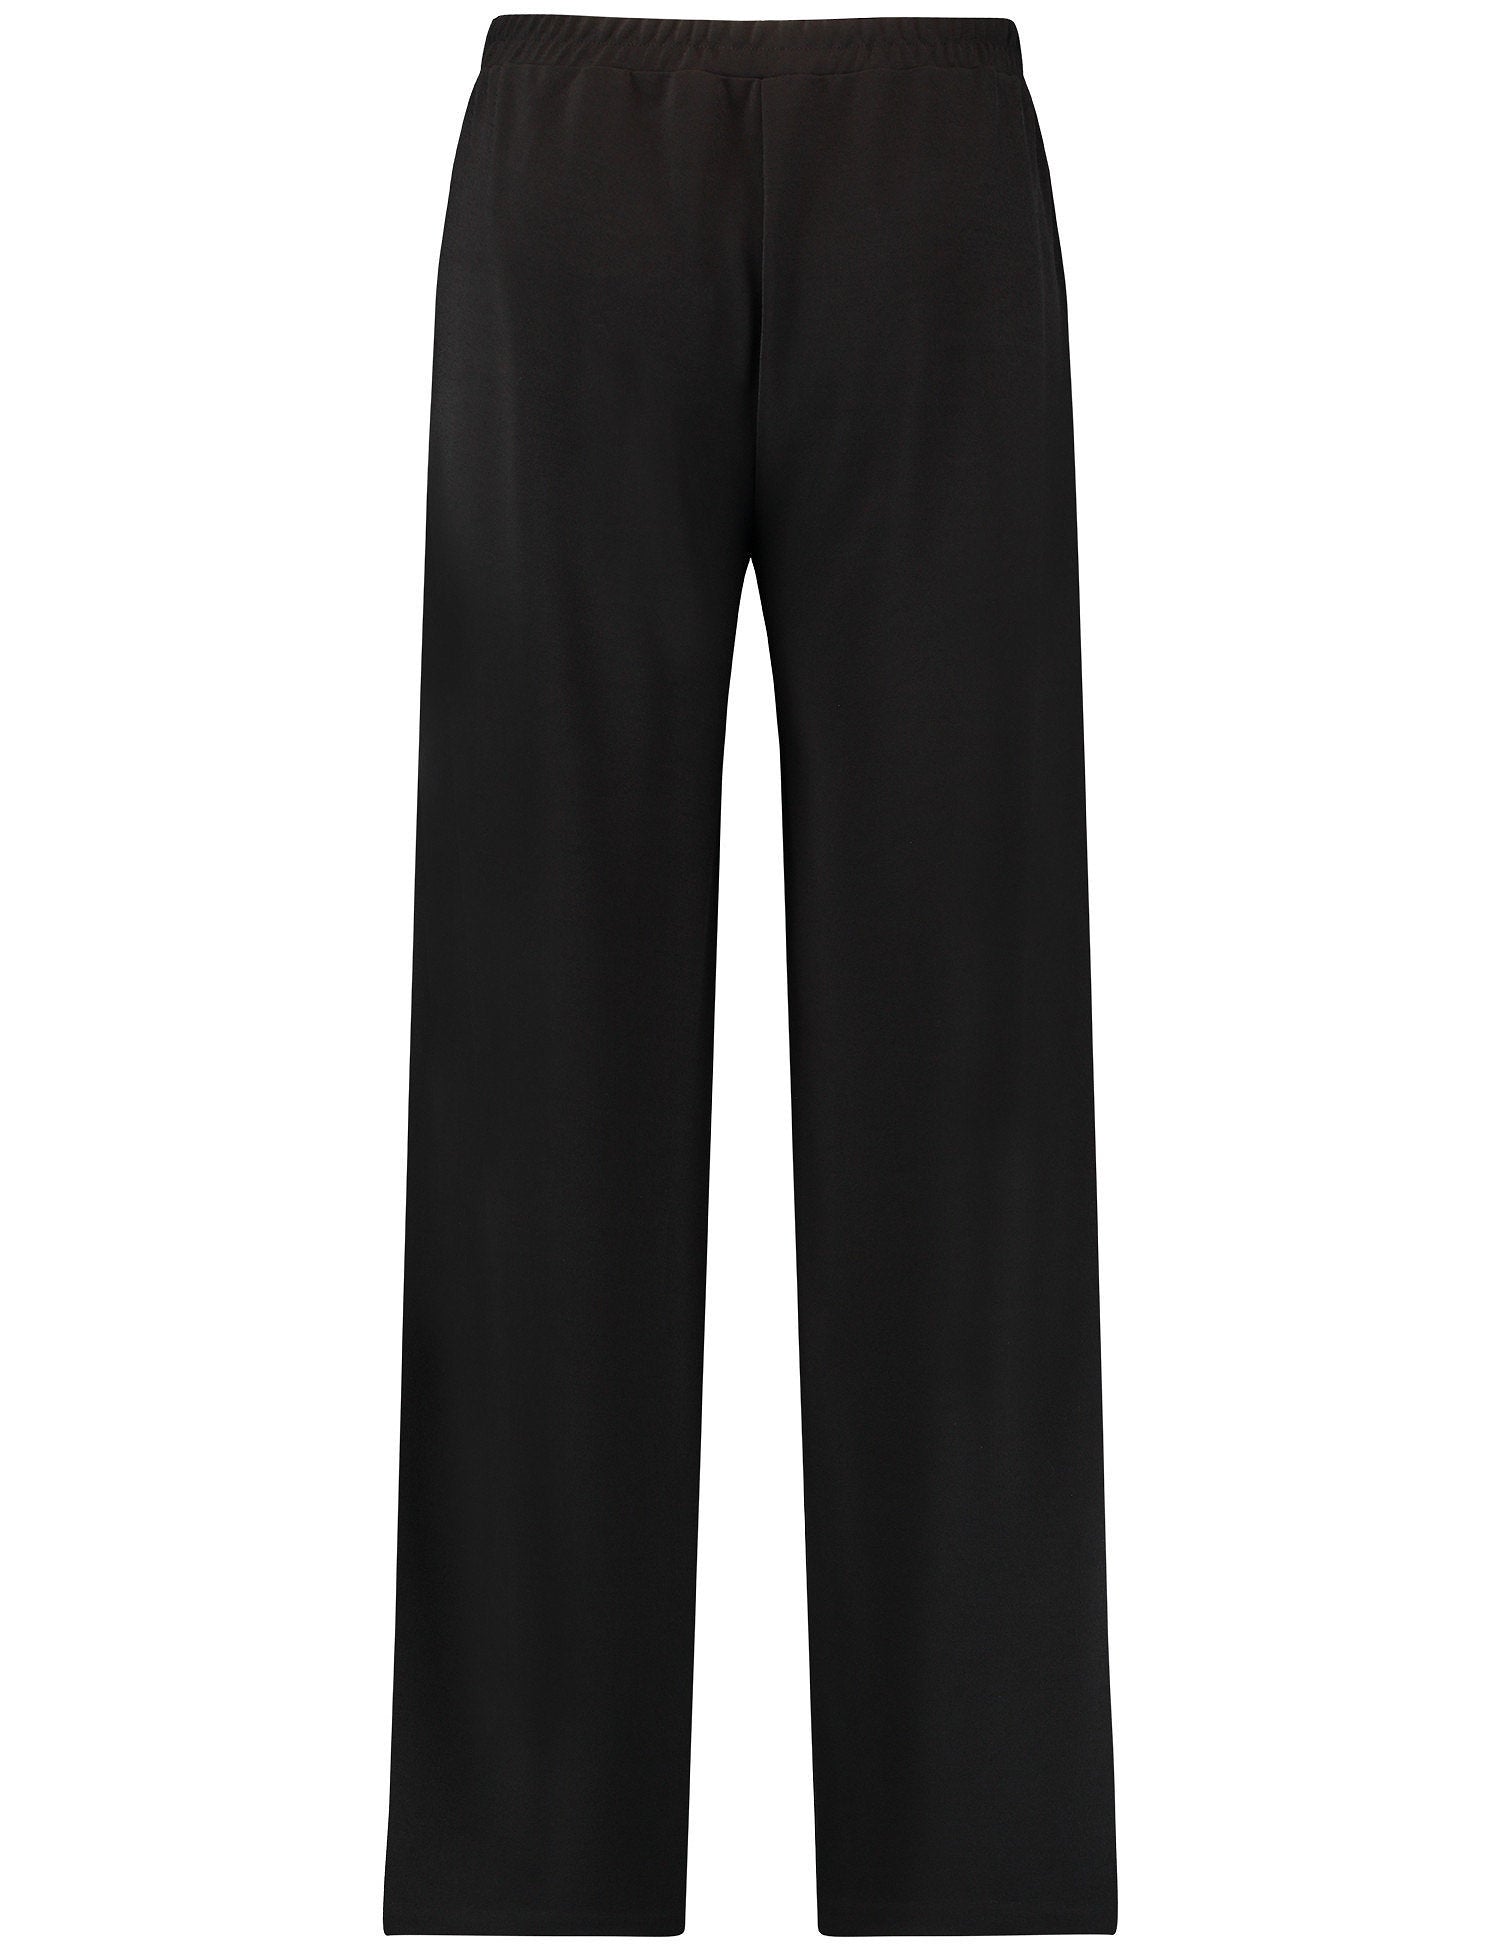 Slip-On Trousers With Side Piping_925009-35031_11000_03